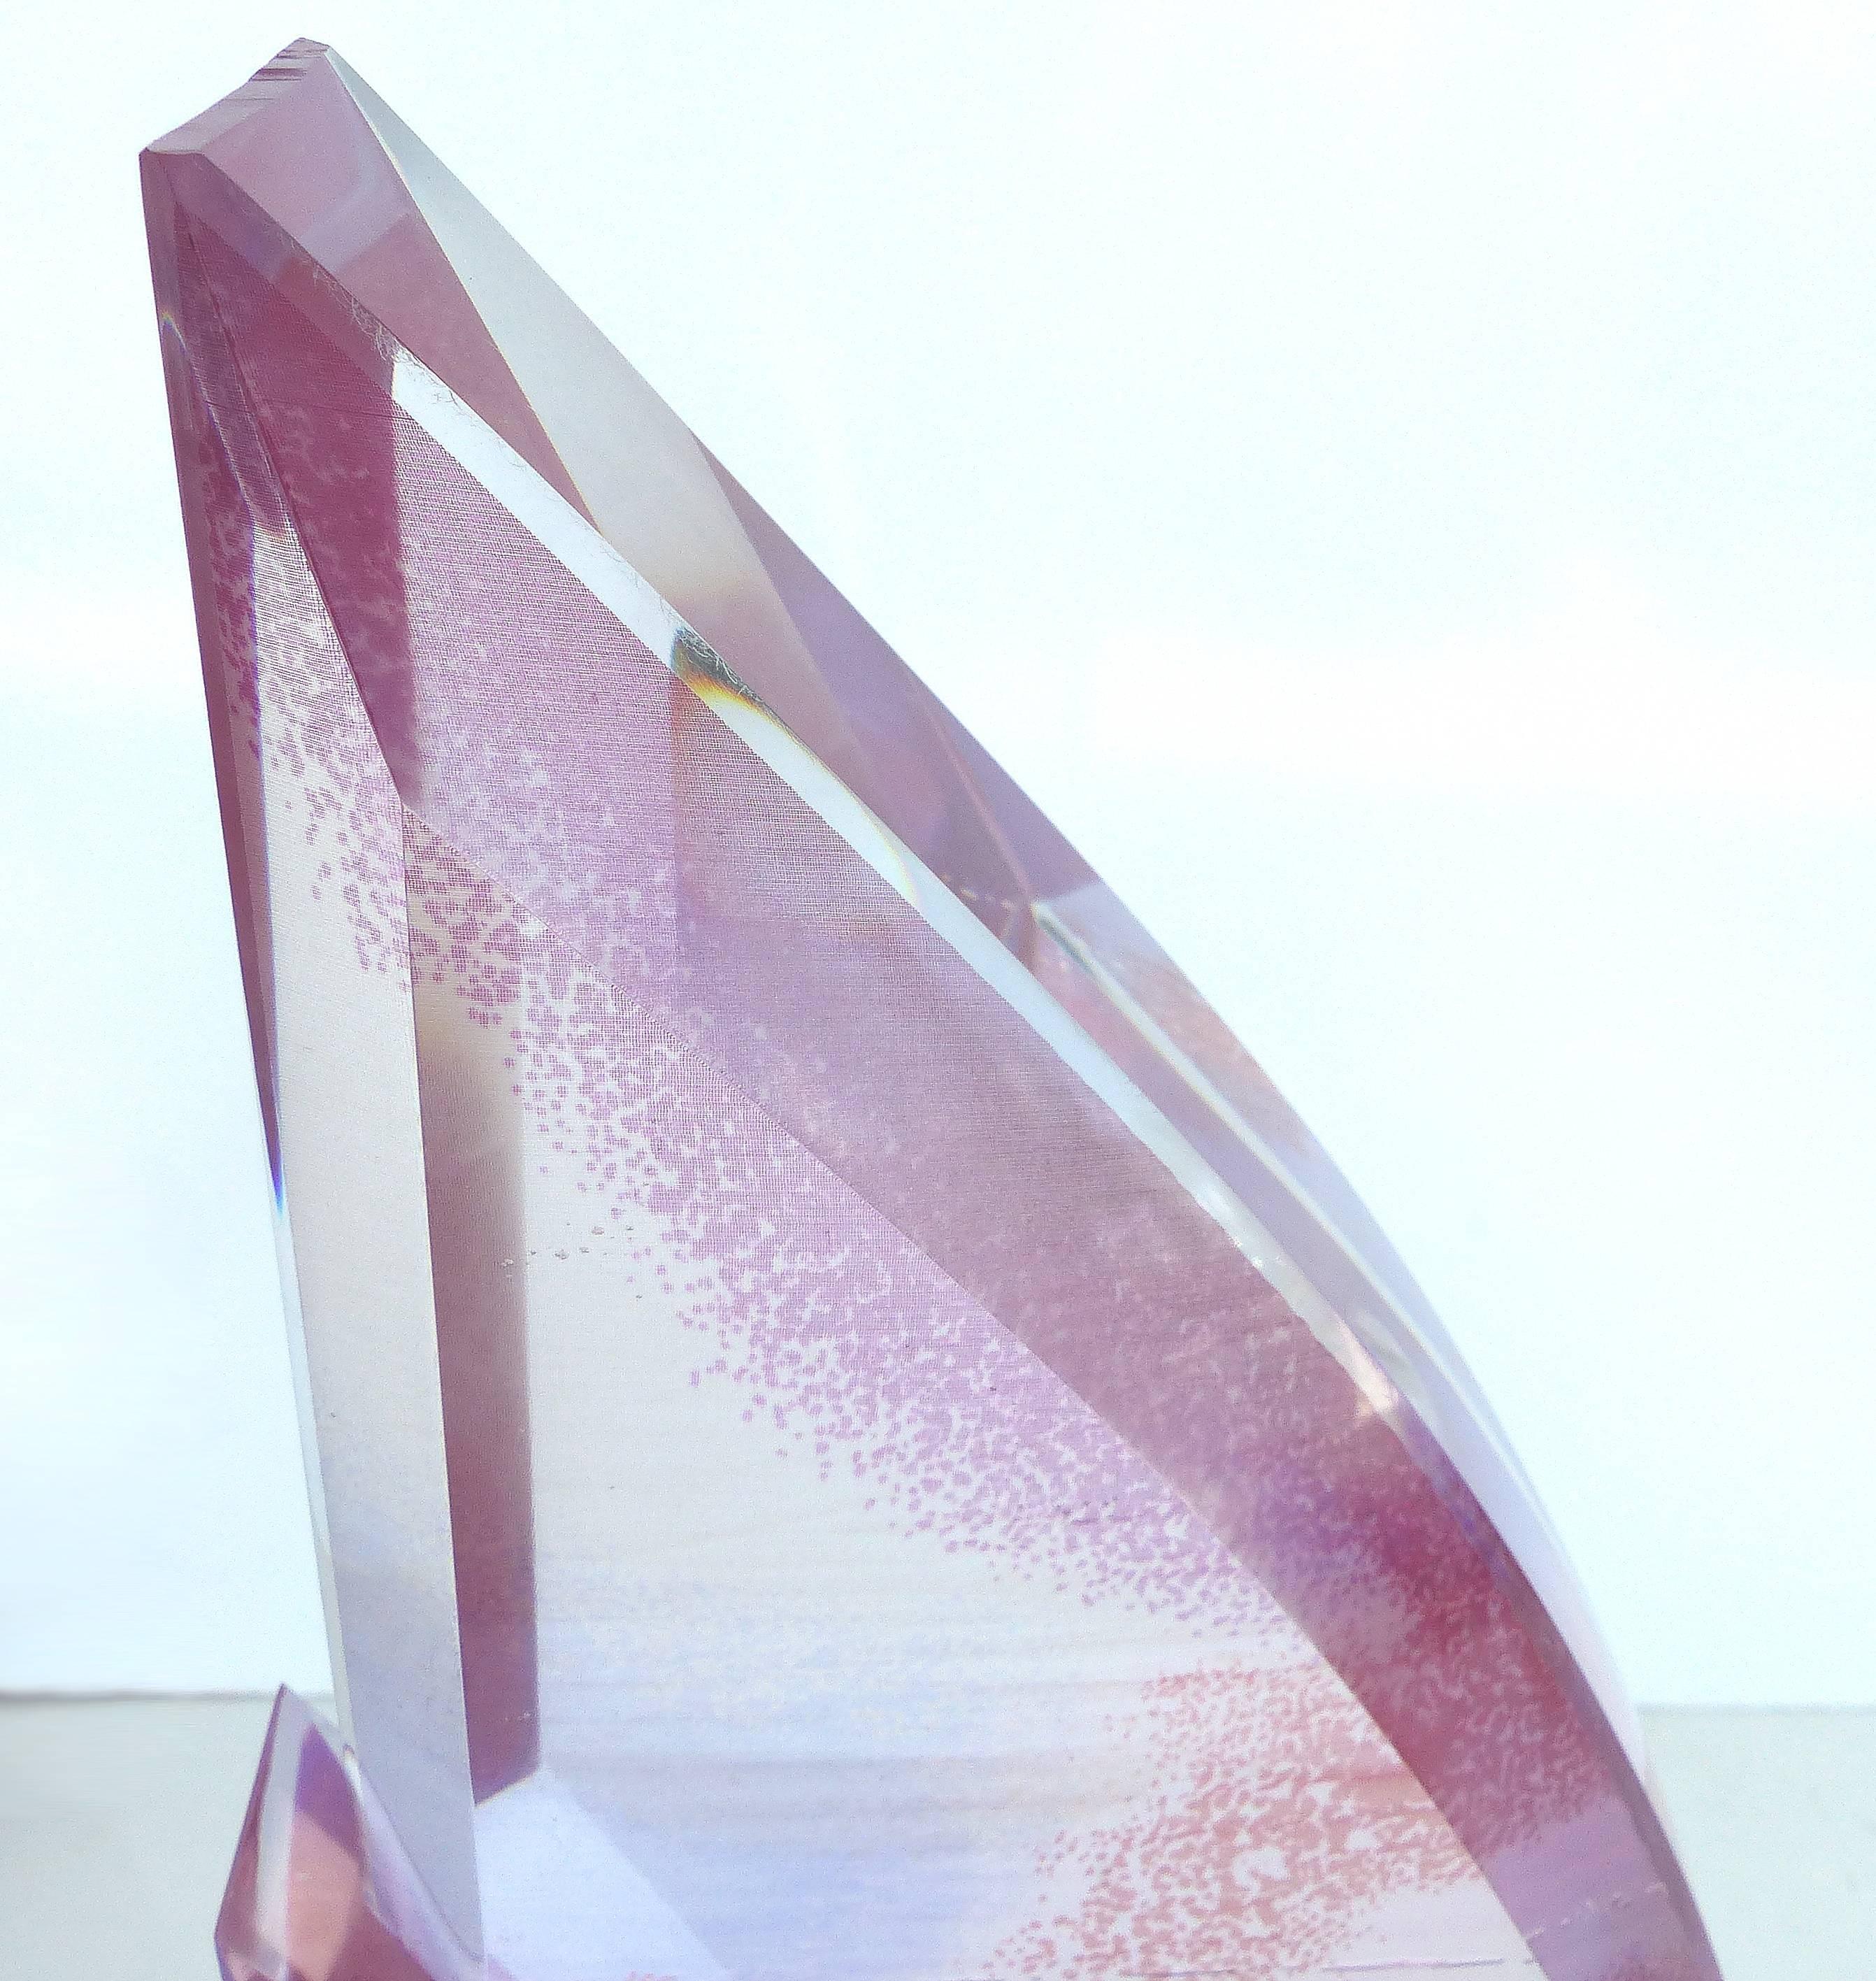 American Custom-Made Lucite Sculpture with Infused Color